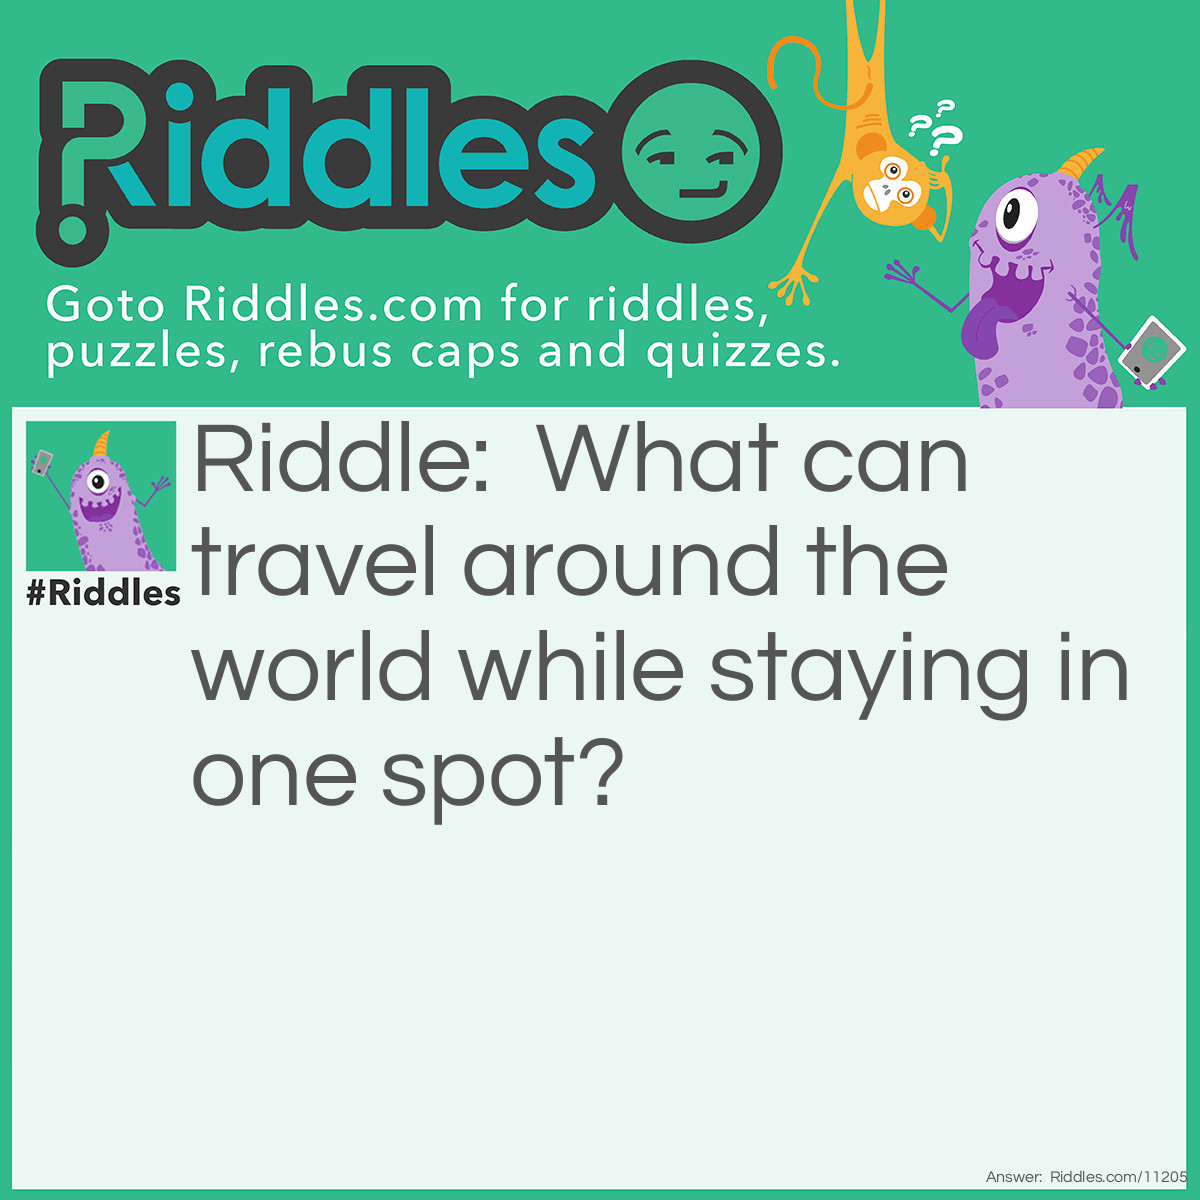 Riddle: What can travel around the world while staying in one spot? Answer: The answer is a stamp.